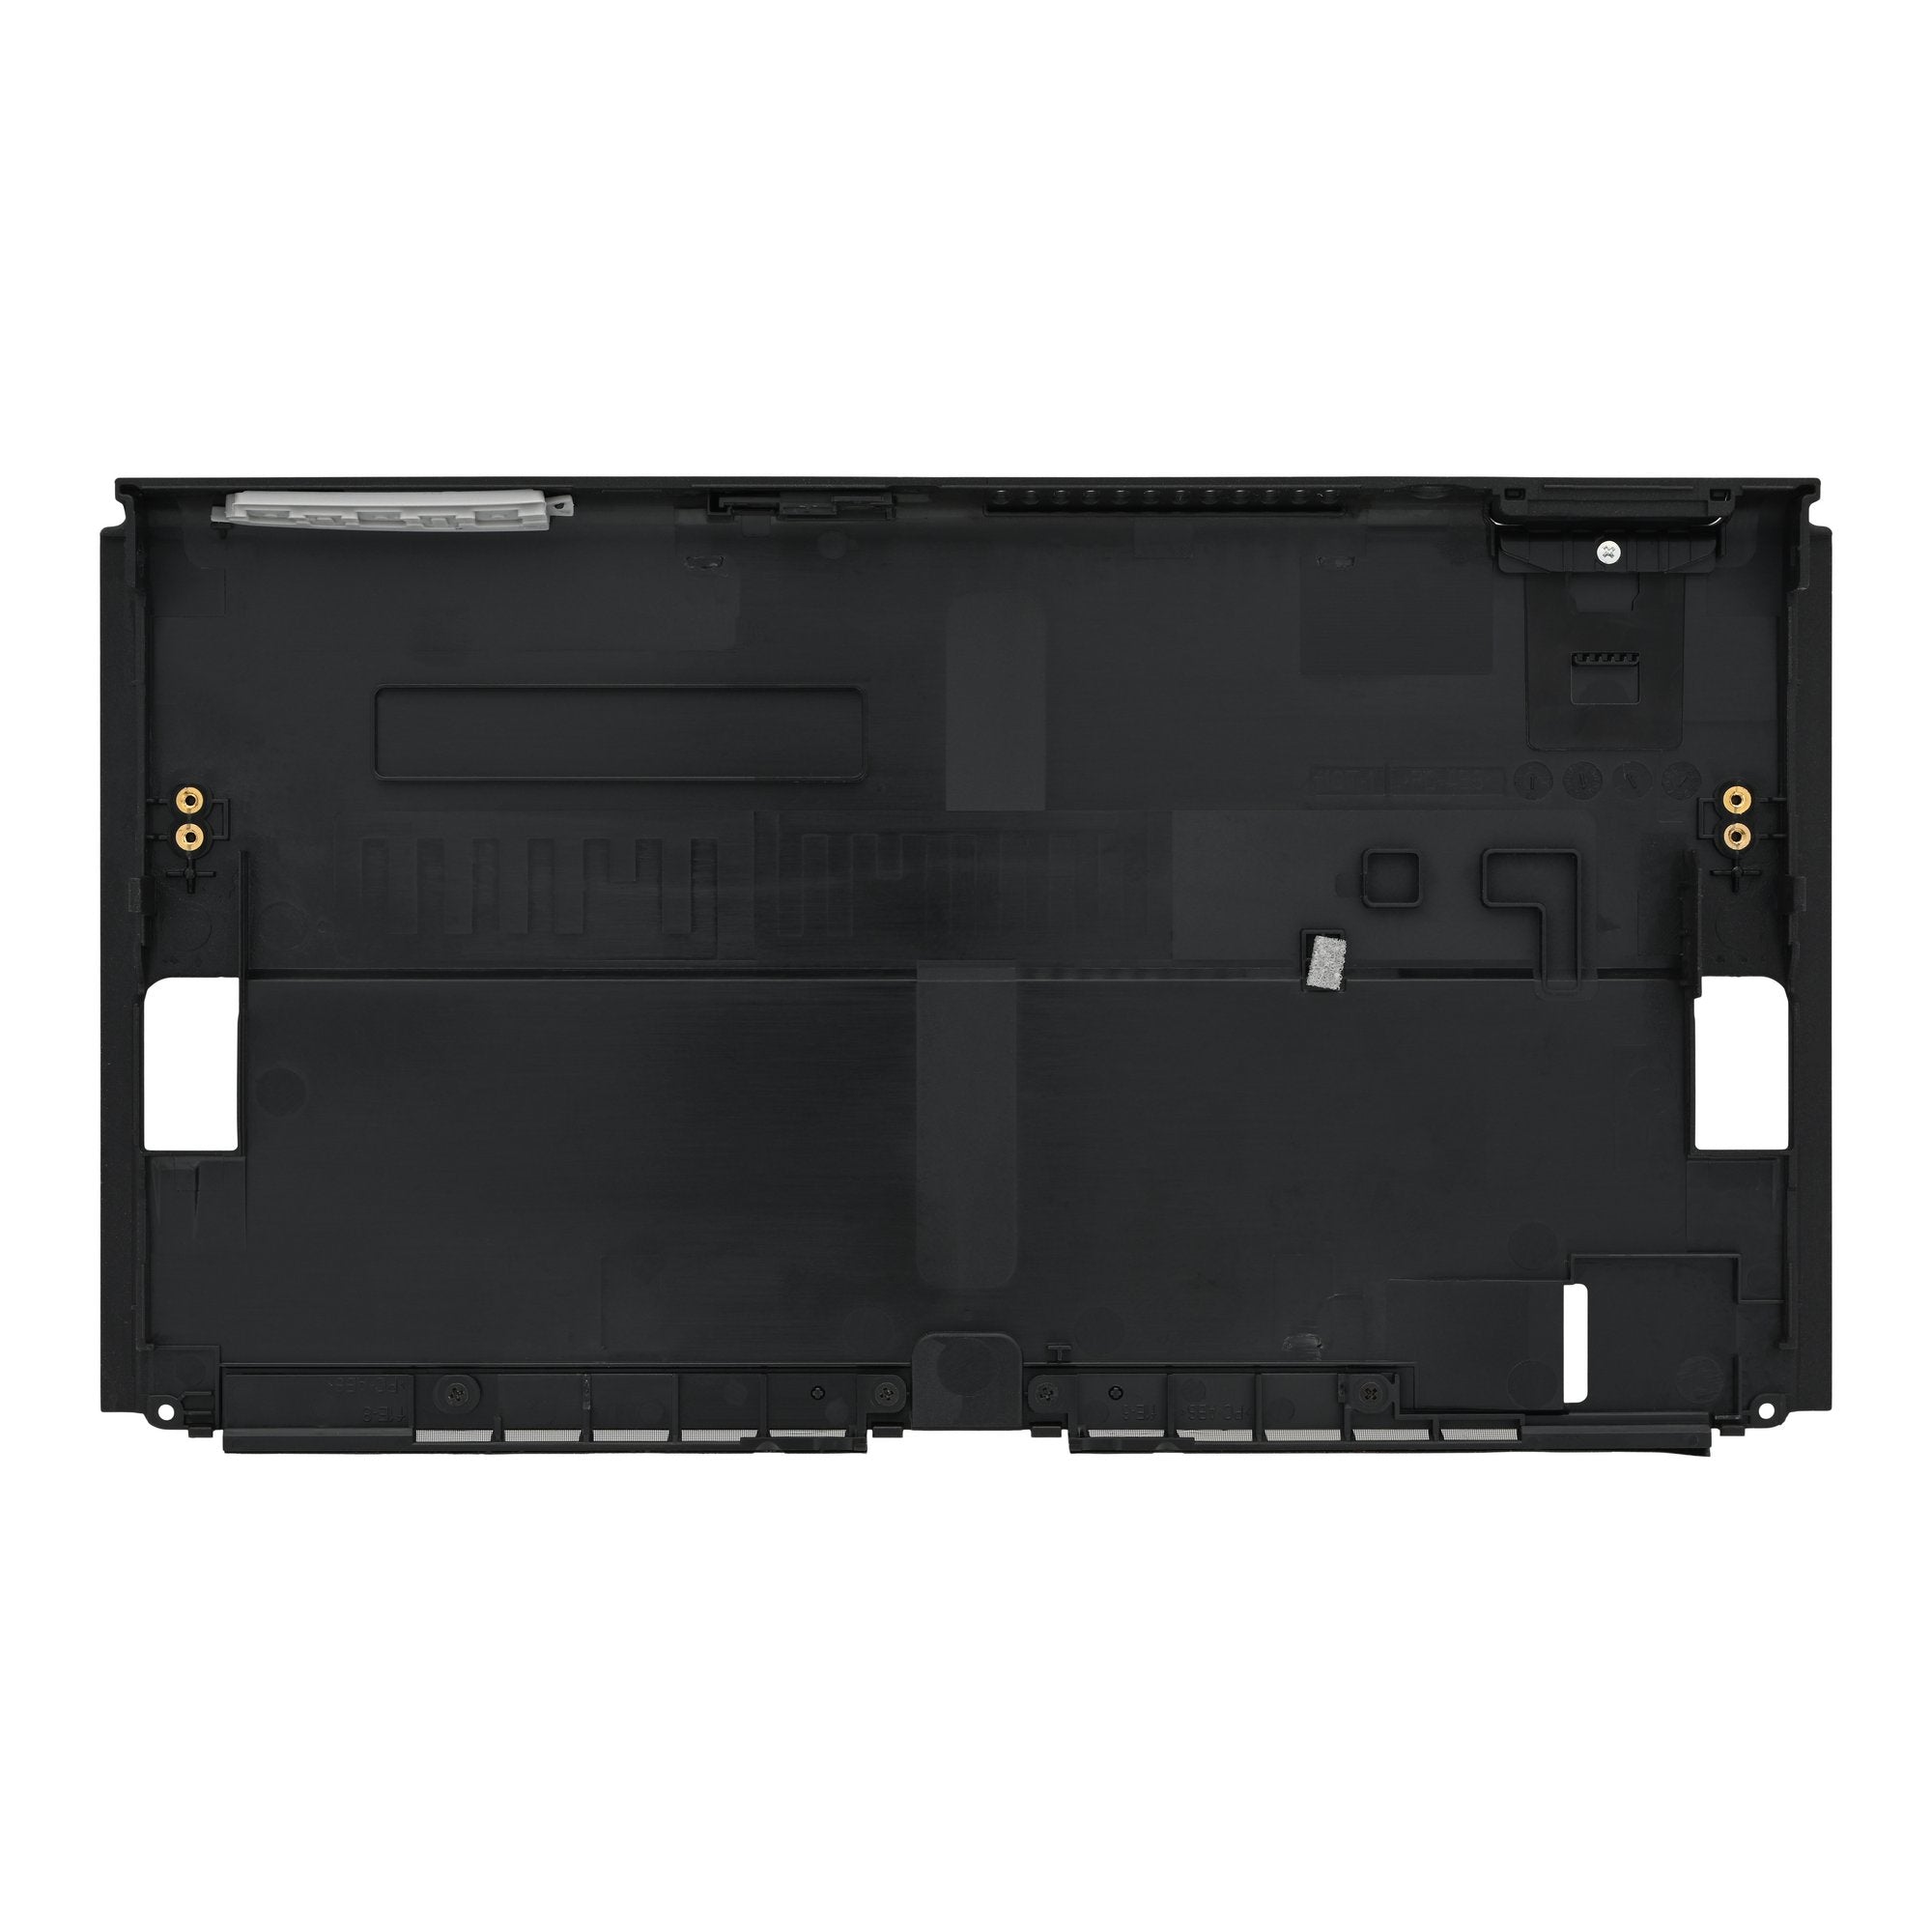 Nintendo Switch OLED Console Rear Case